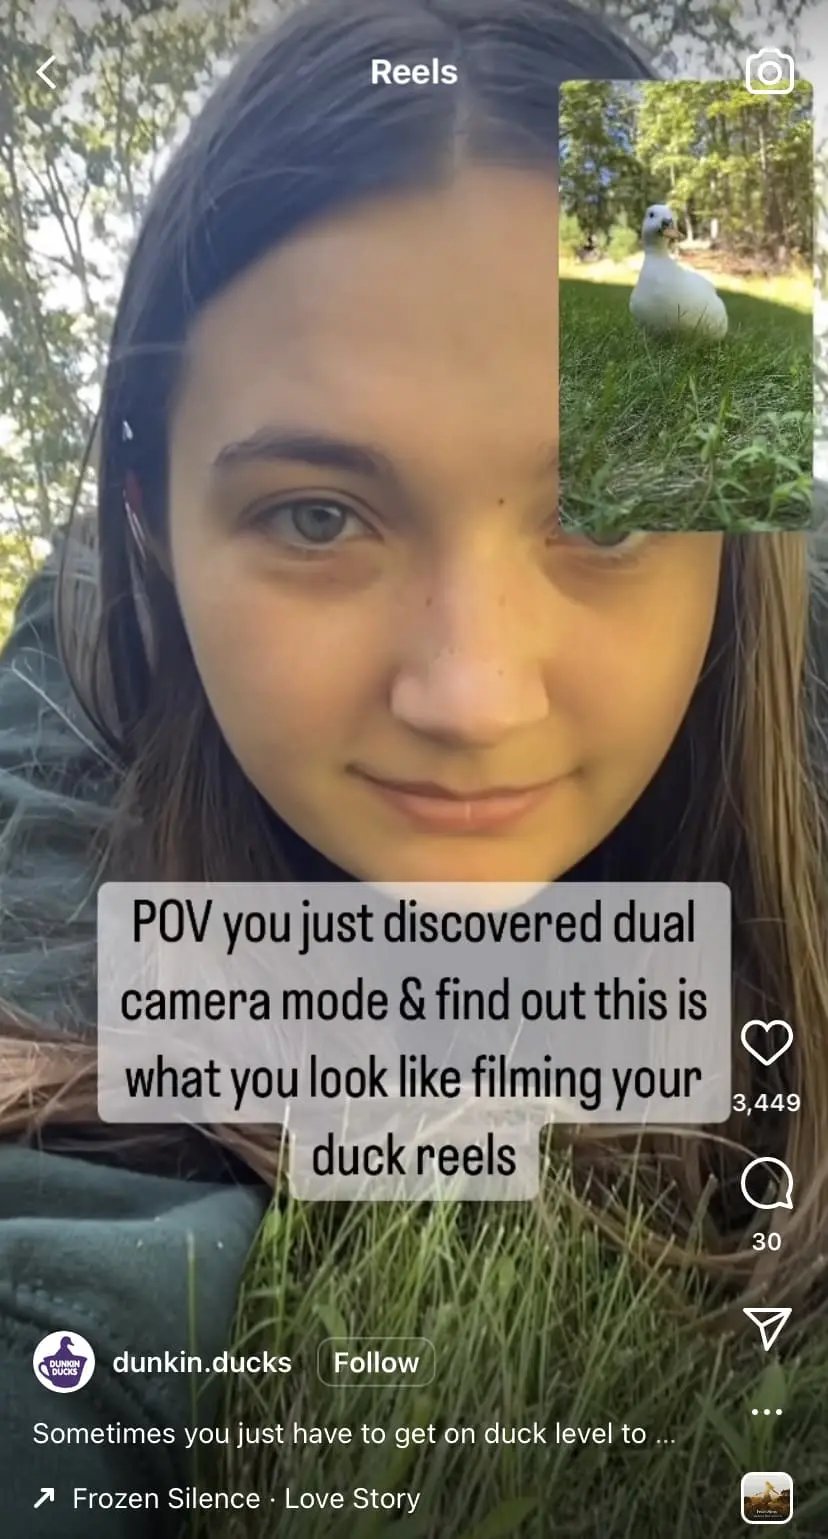 Girl uses dual camera feature to film baby duck